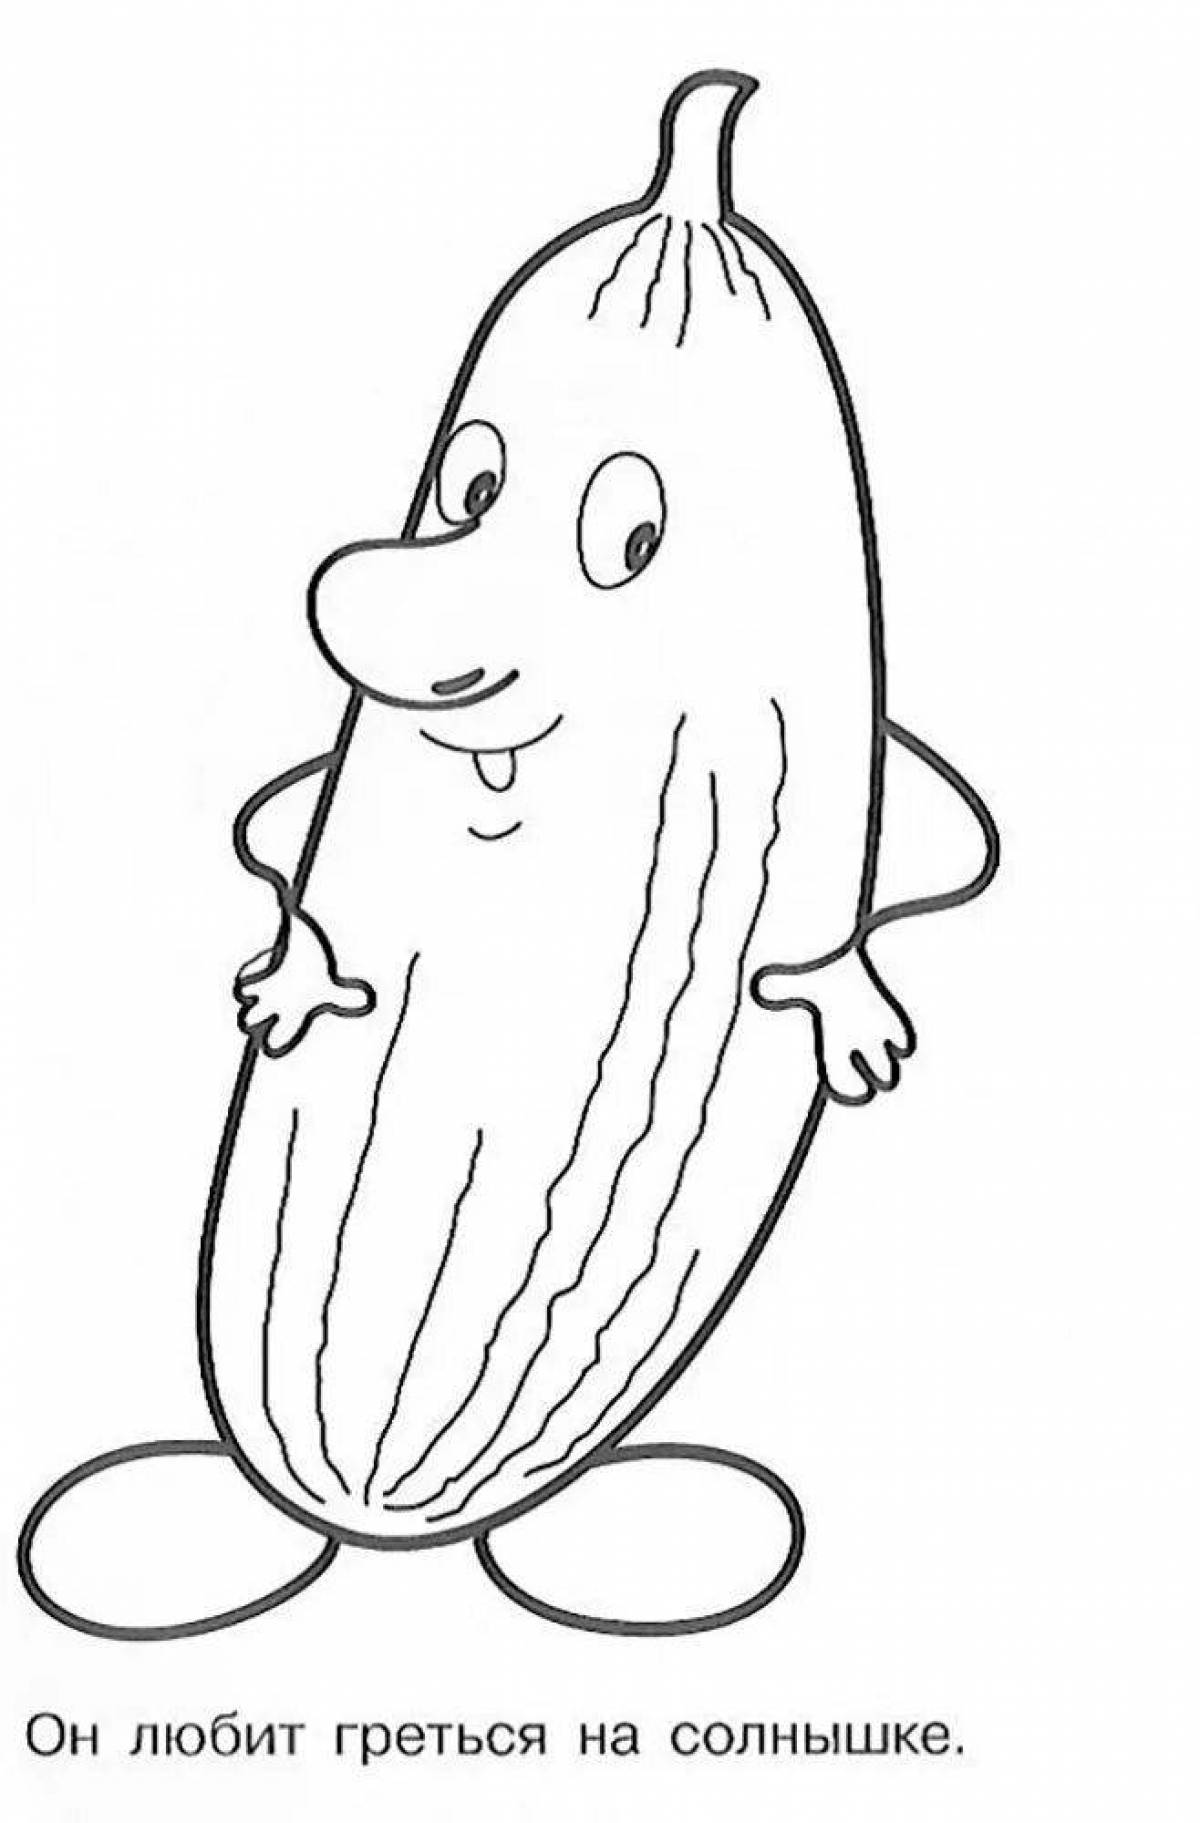 Innovative zucchini coloring page